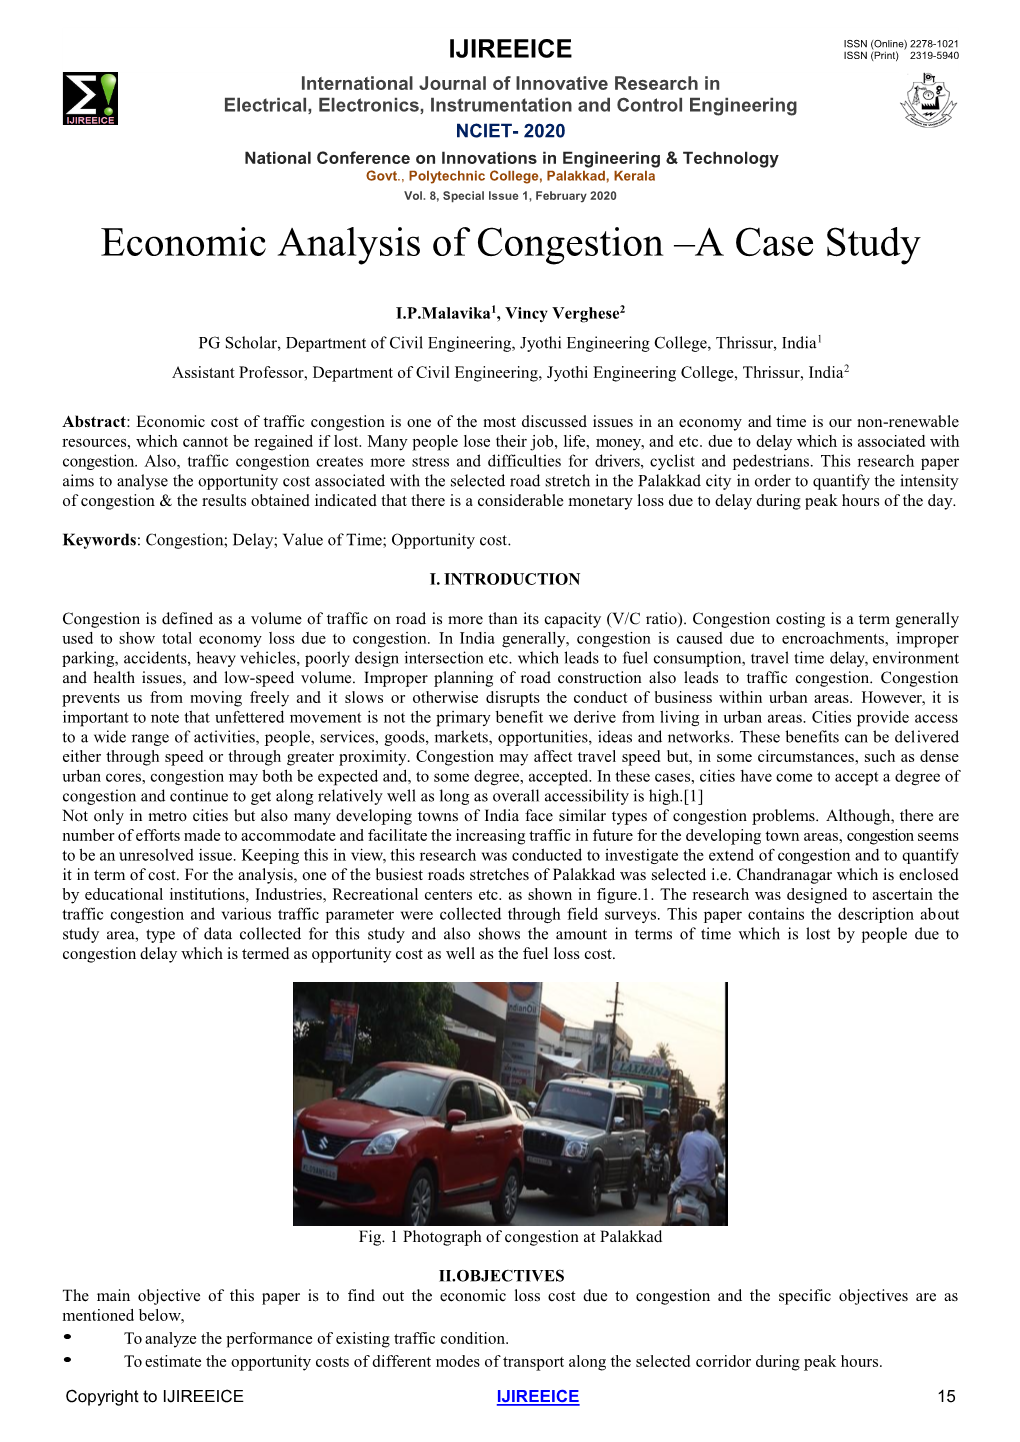 Economic Analysis of Congestion –A Case Study